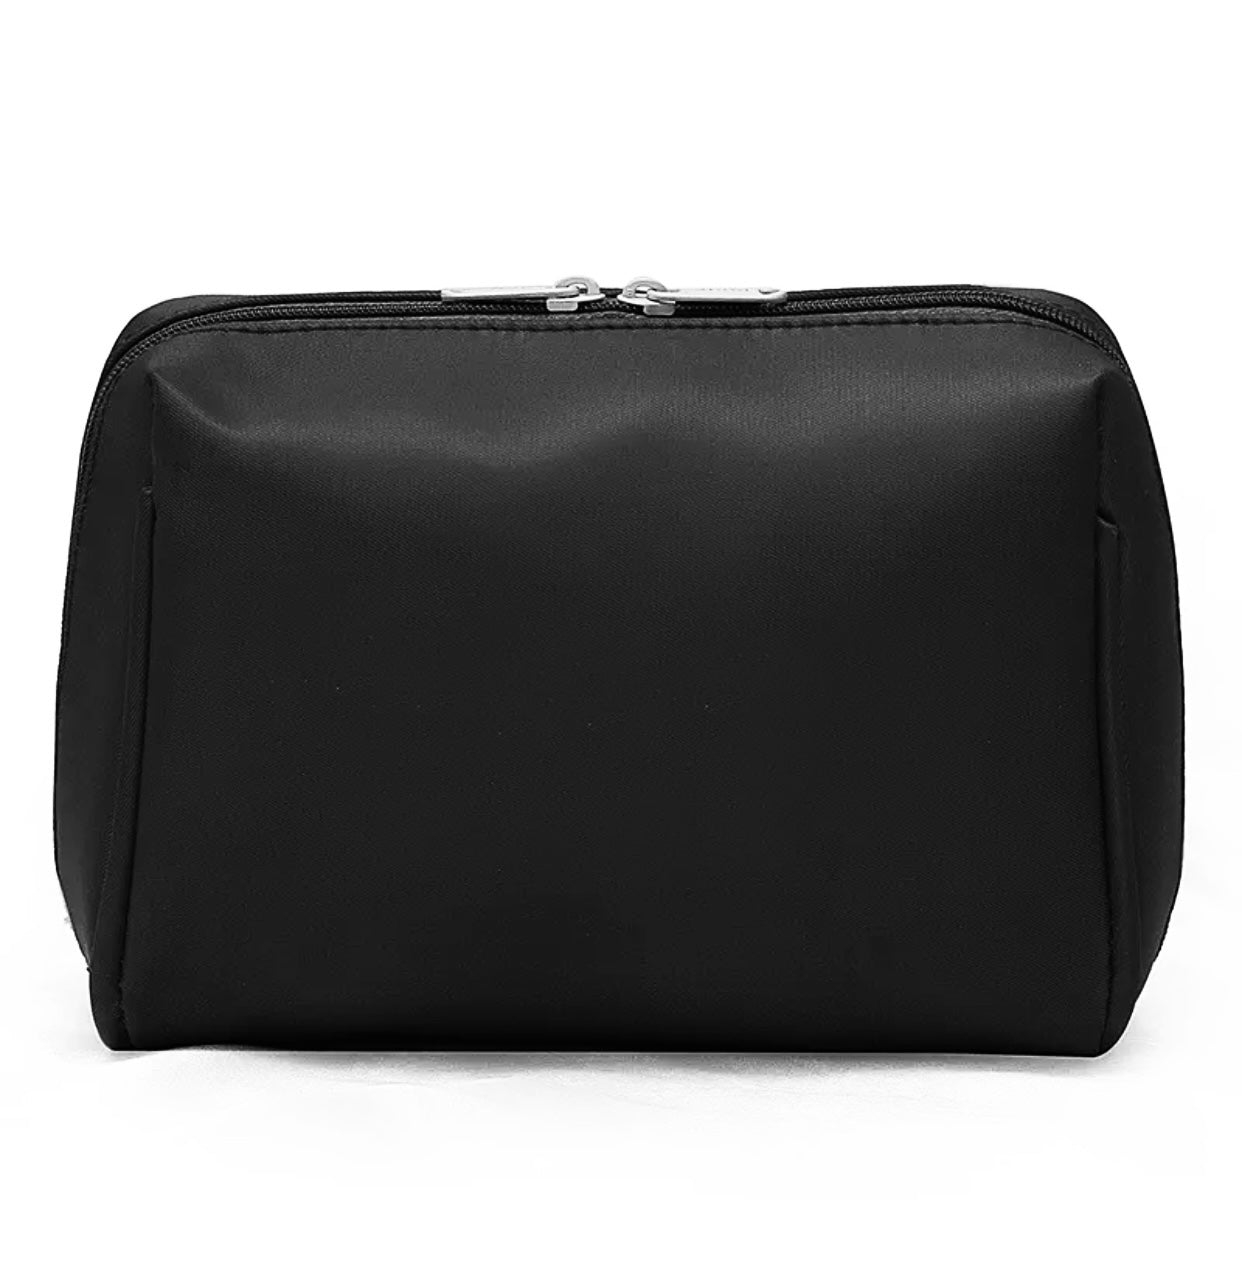 Make up bag in black from The Collective Dancewear 